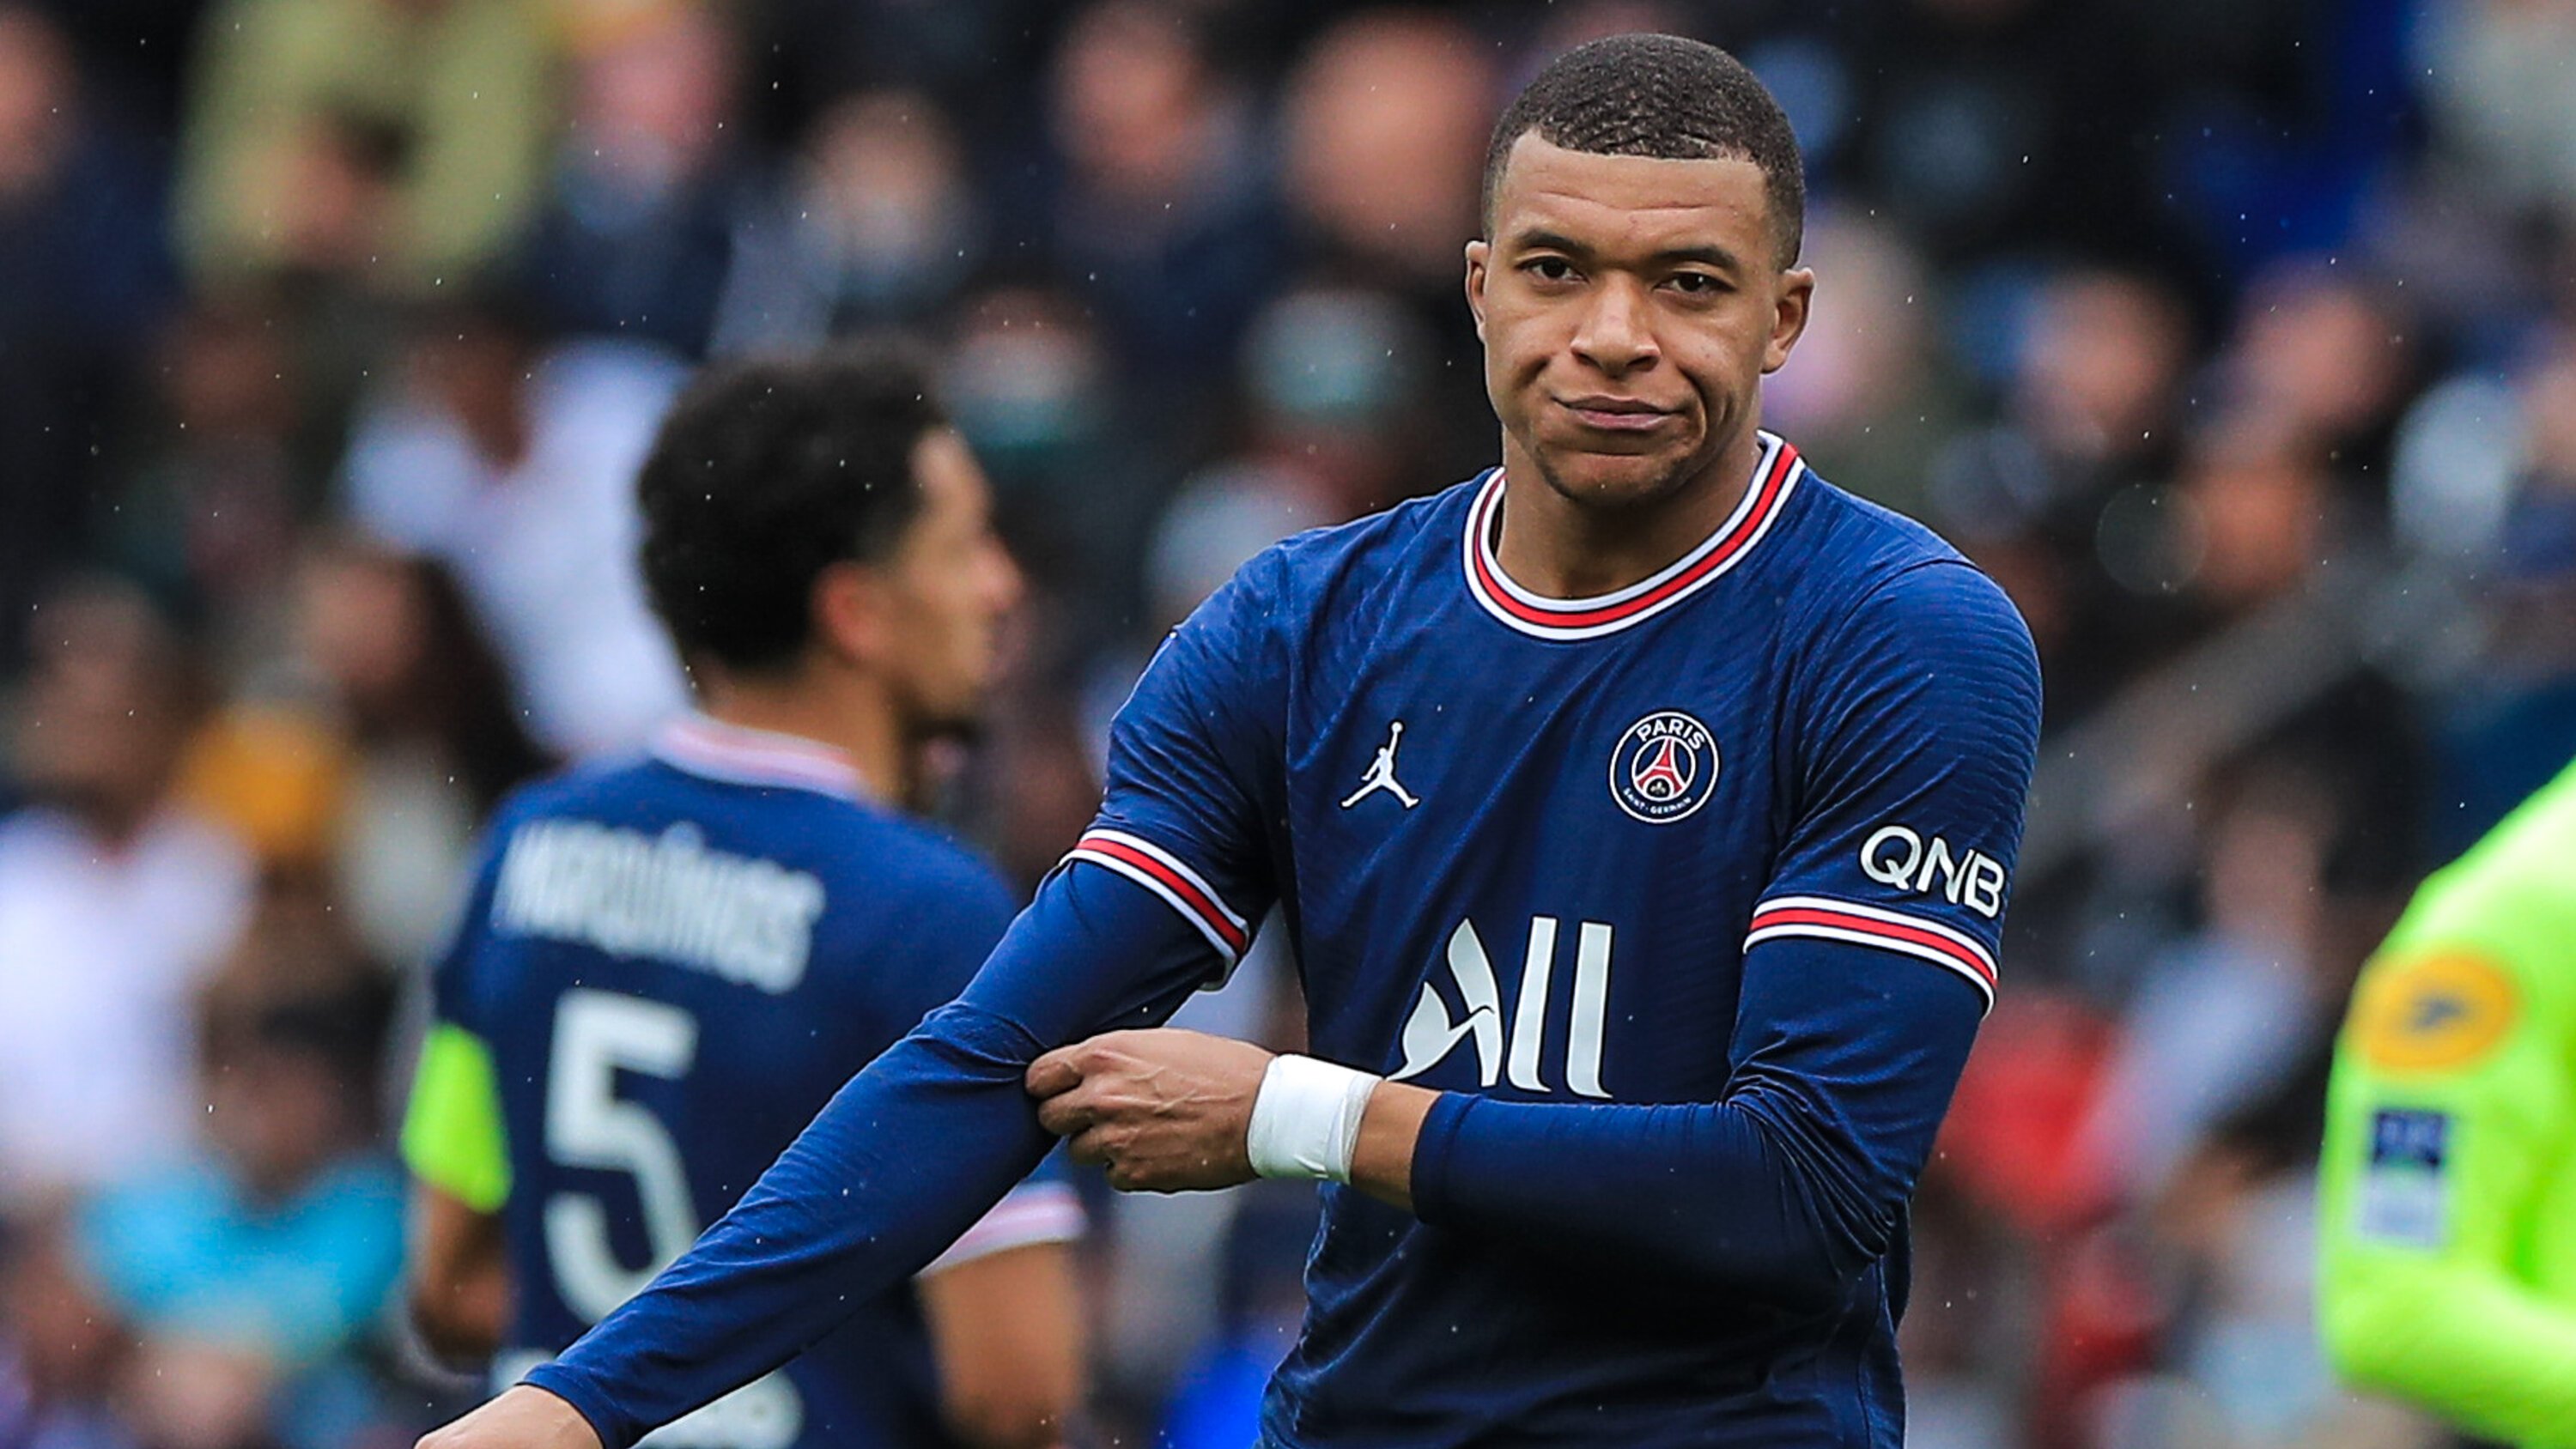 At P.S.G., Kylian Mbappé Has to Go